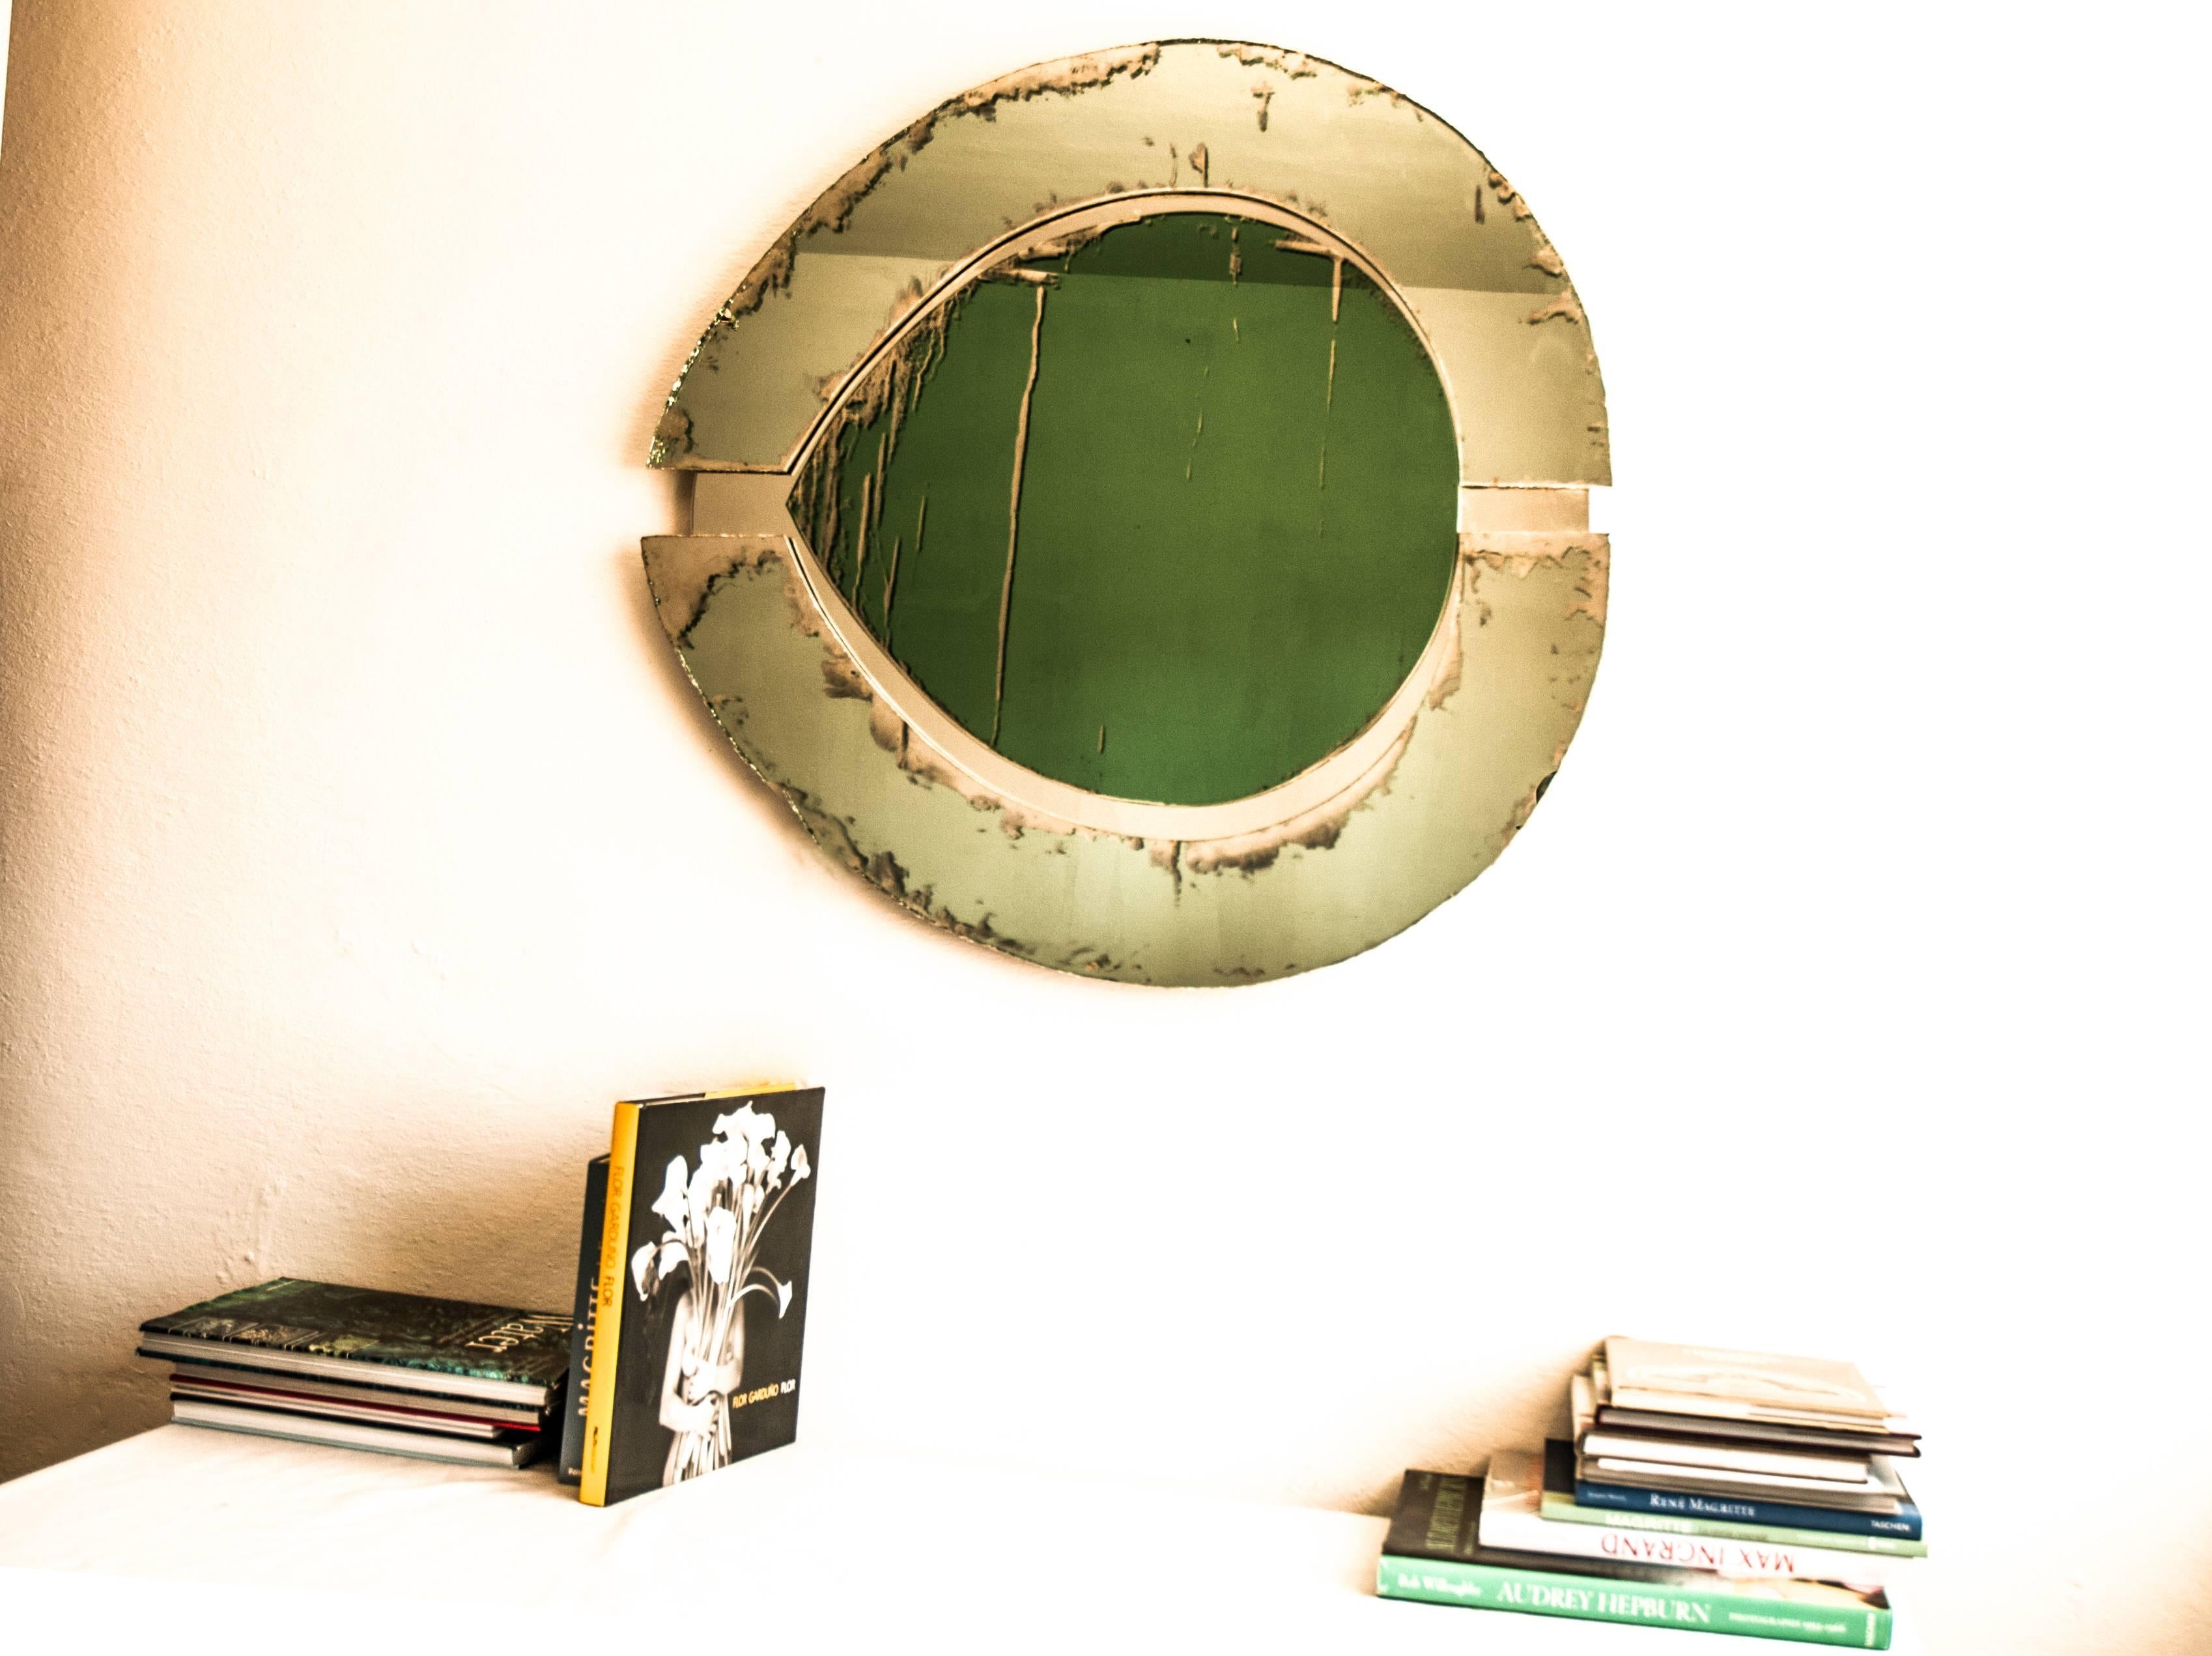 Modern Irys Wall Mirror with Jade Green Mirror Inside and Actual Mirror Outside